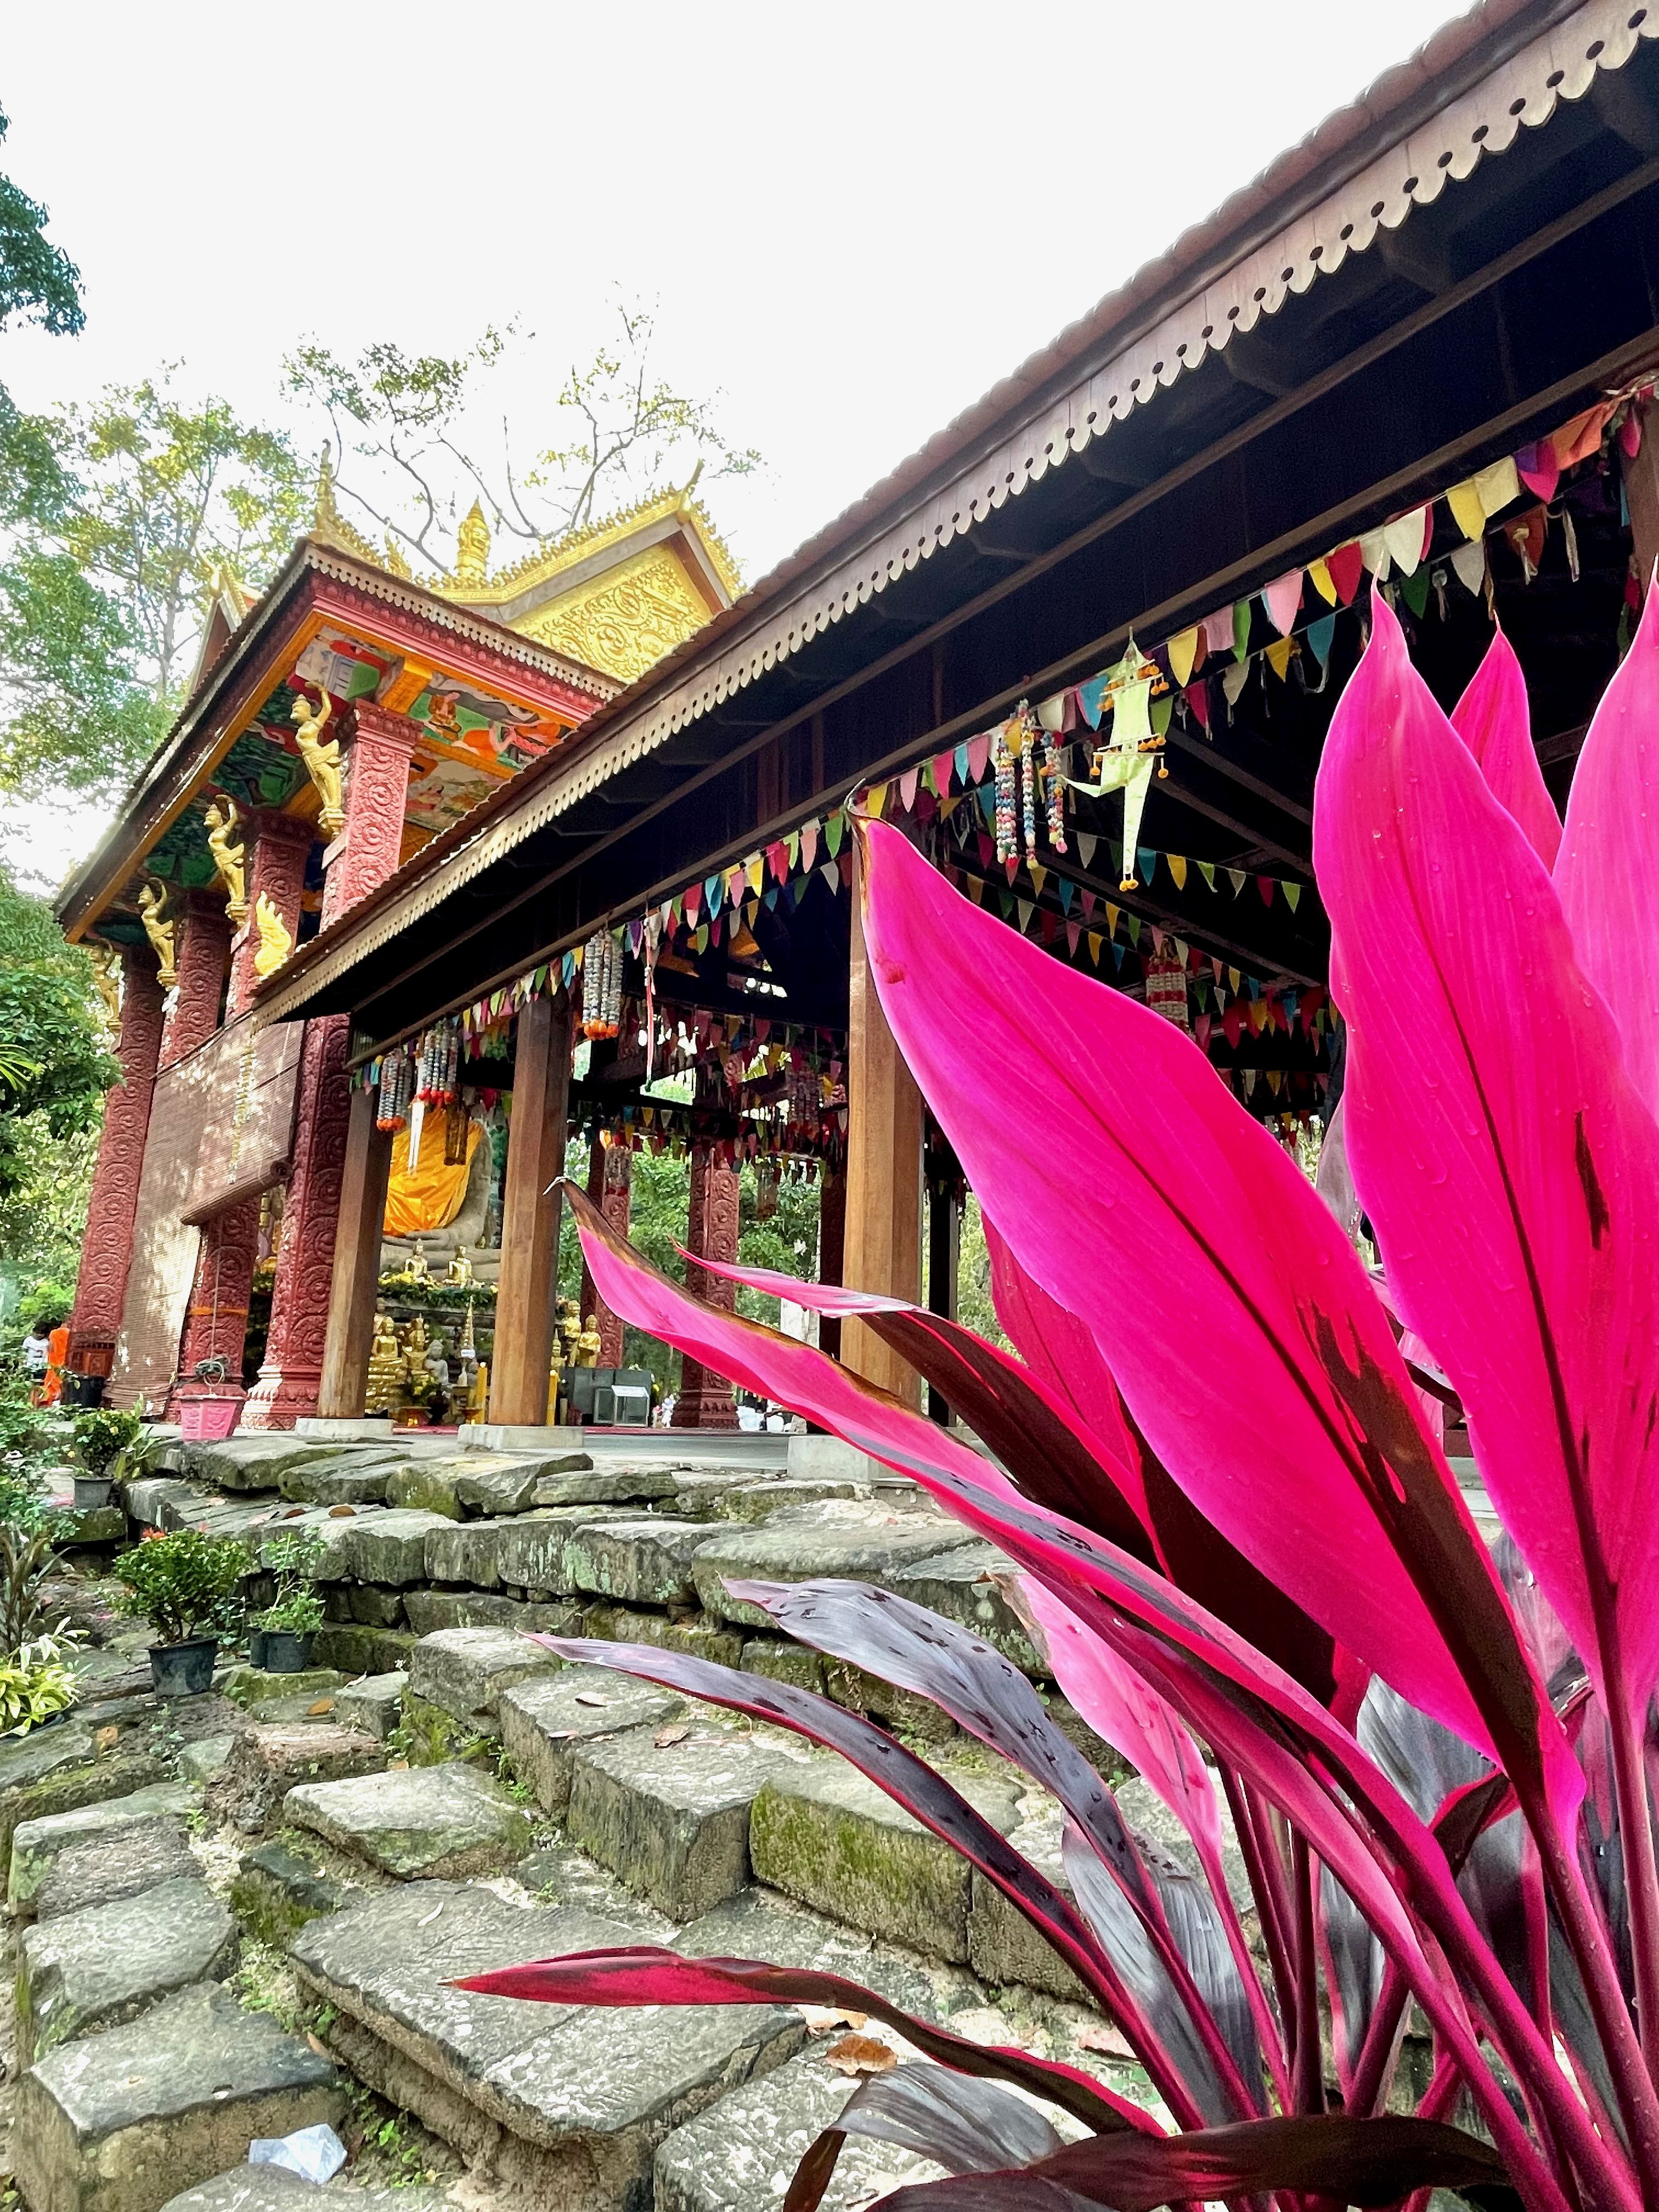 A pink plant in the foreground and a Cambodian temple in the background